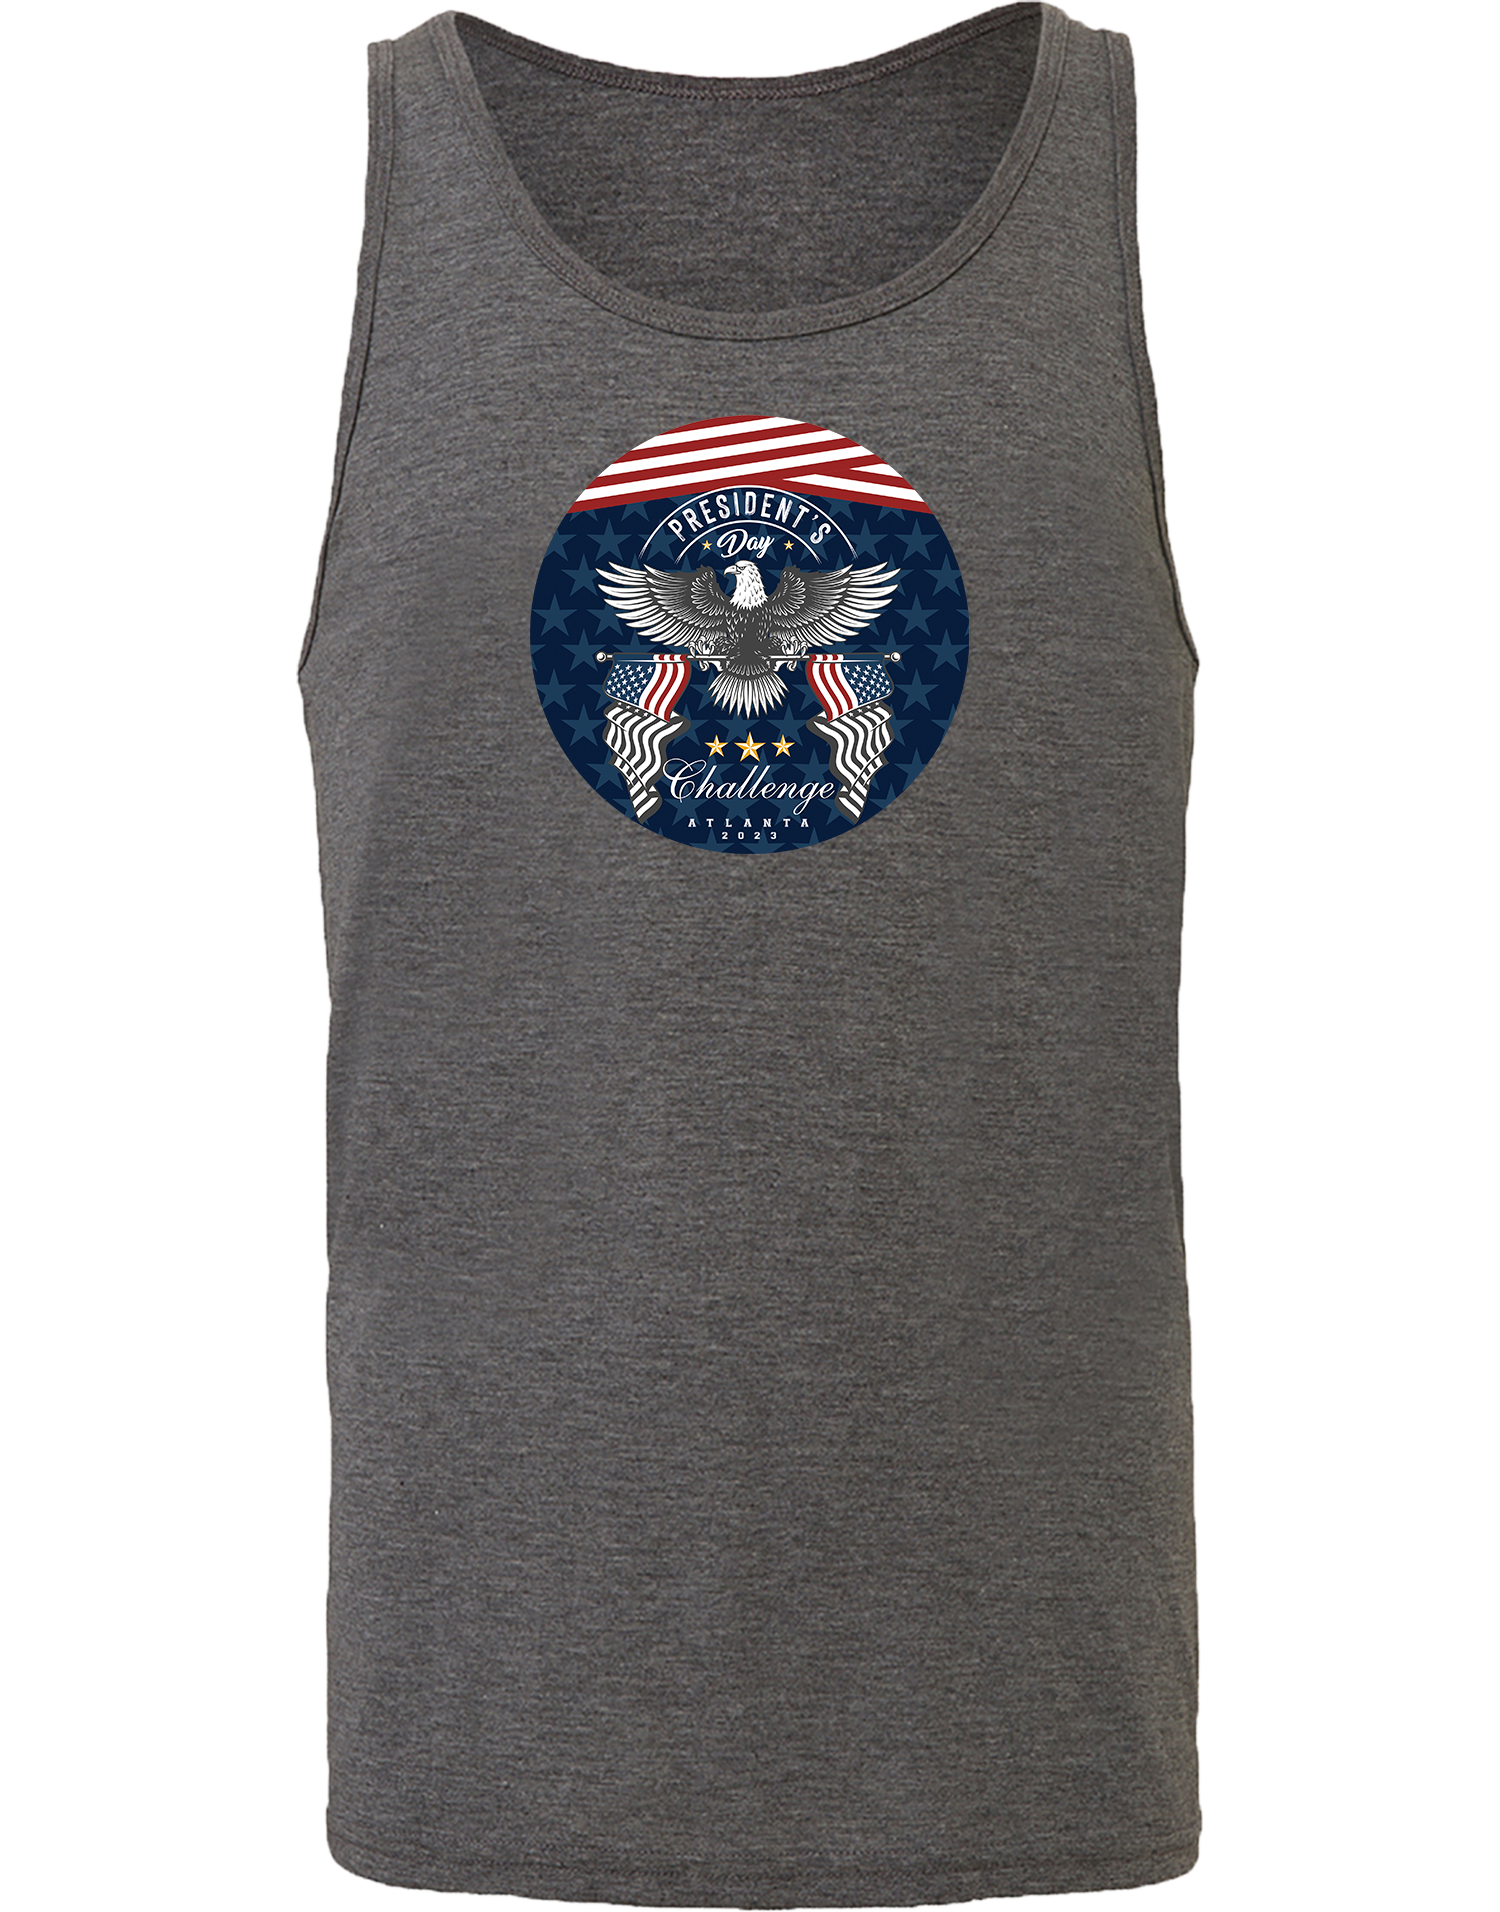 TANK TOP - 2023 Presidents Day Challenge